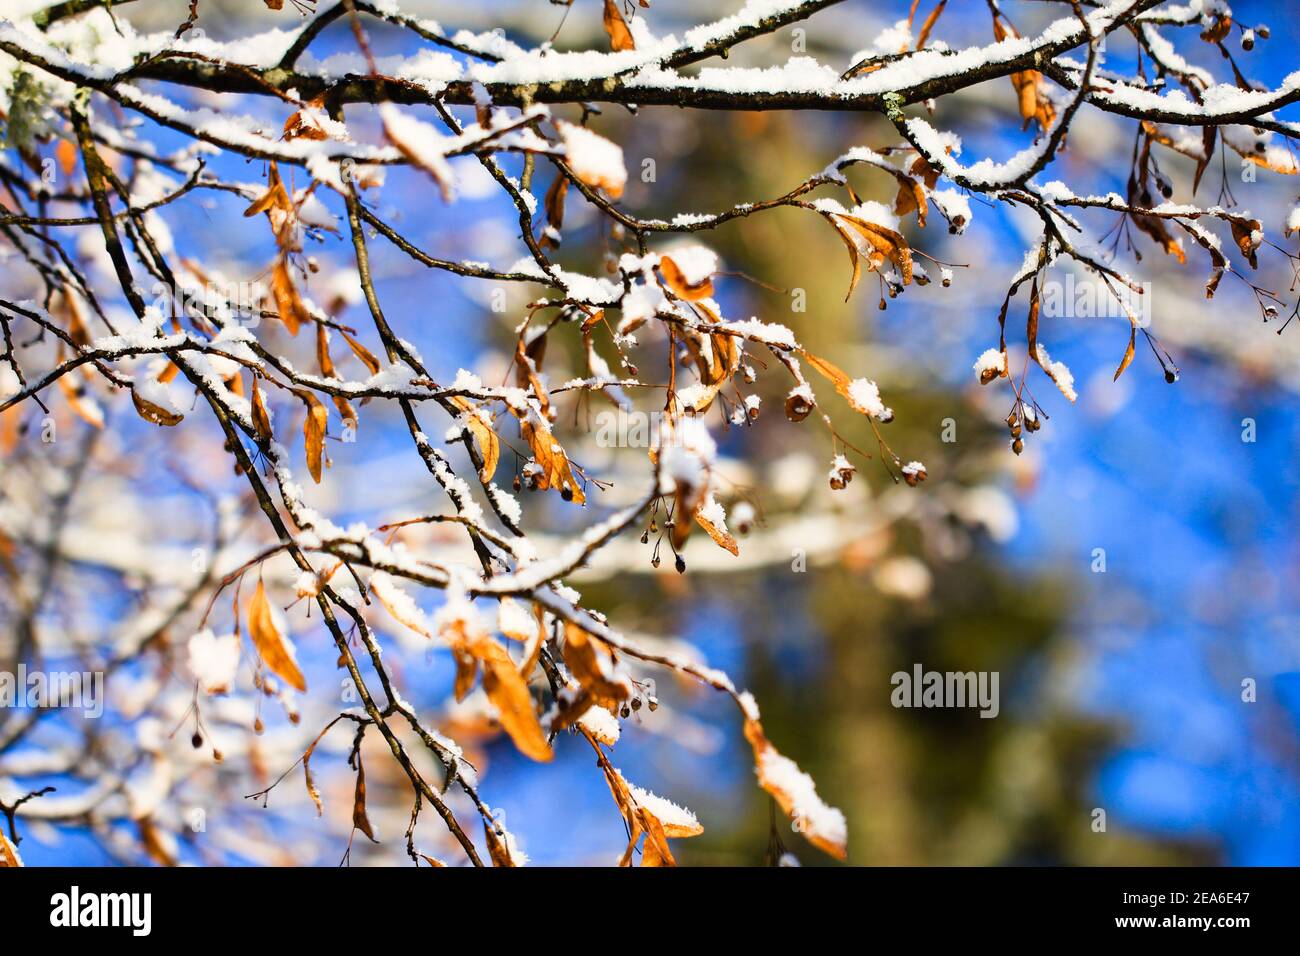 Linden, basswood, Tilia cordata branch with fruits on winter with snow Stock Photo